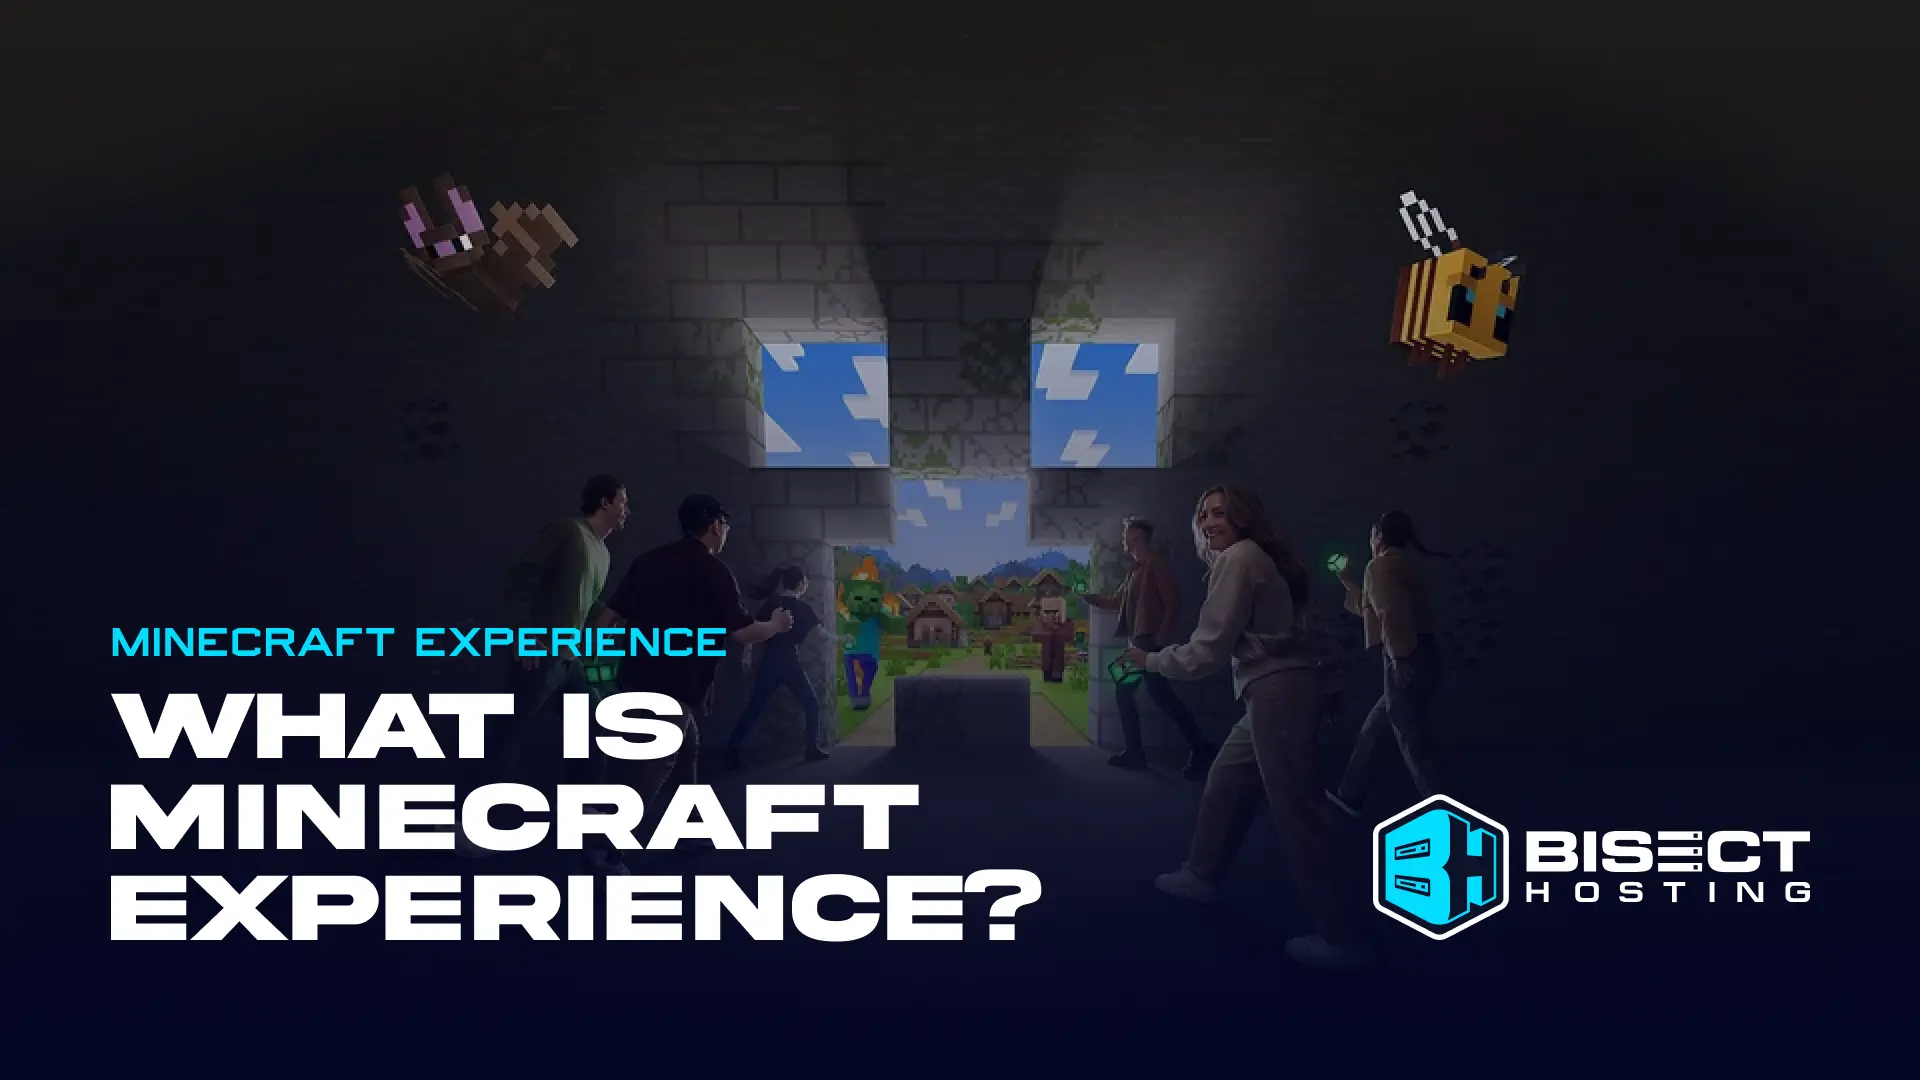 What is Minecraft Experience: Villager Rescue?